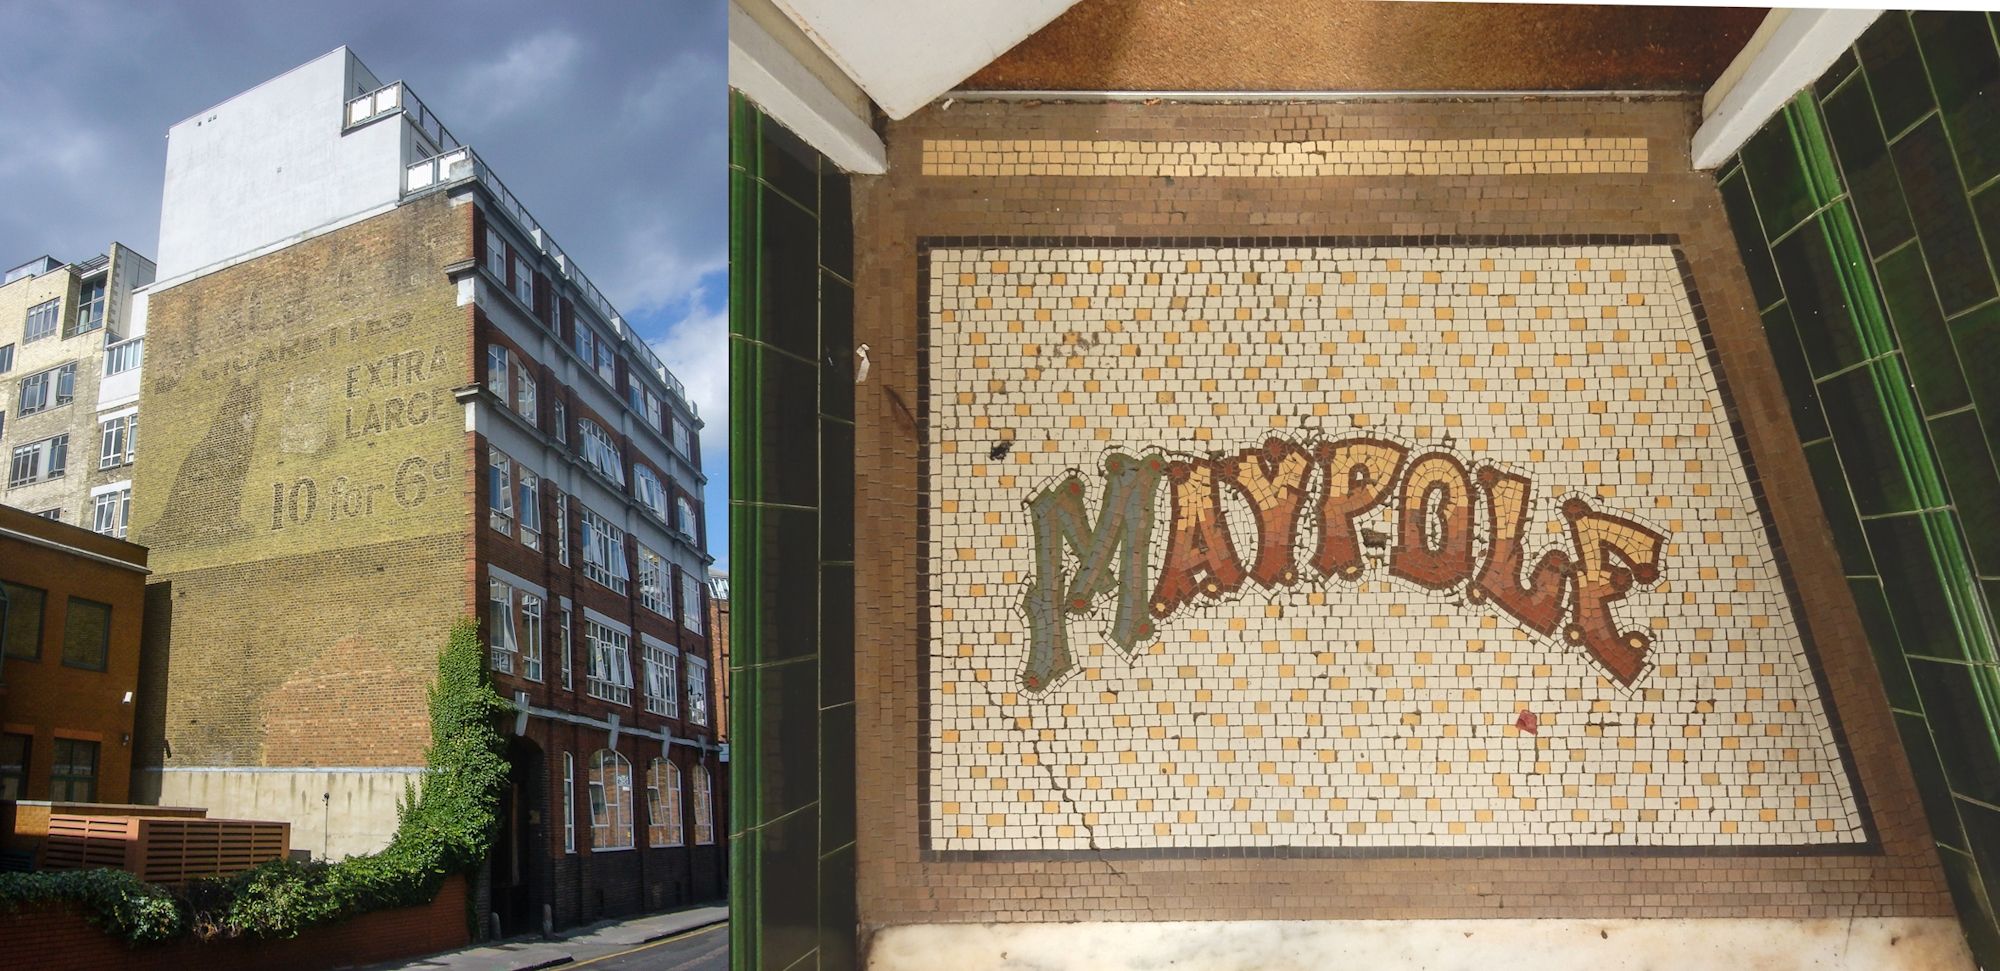 Two images of historic signage, one painted on a brick wall, and one with lettering set with mosaic.